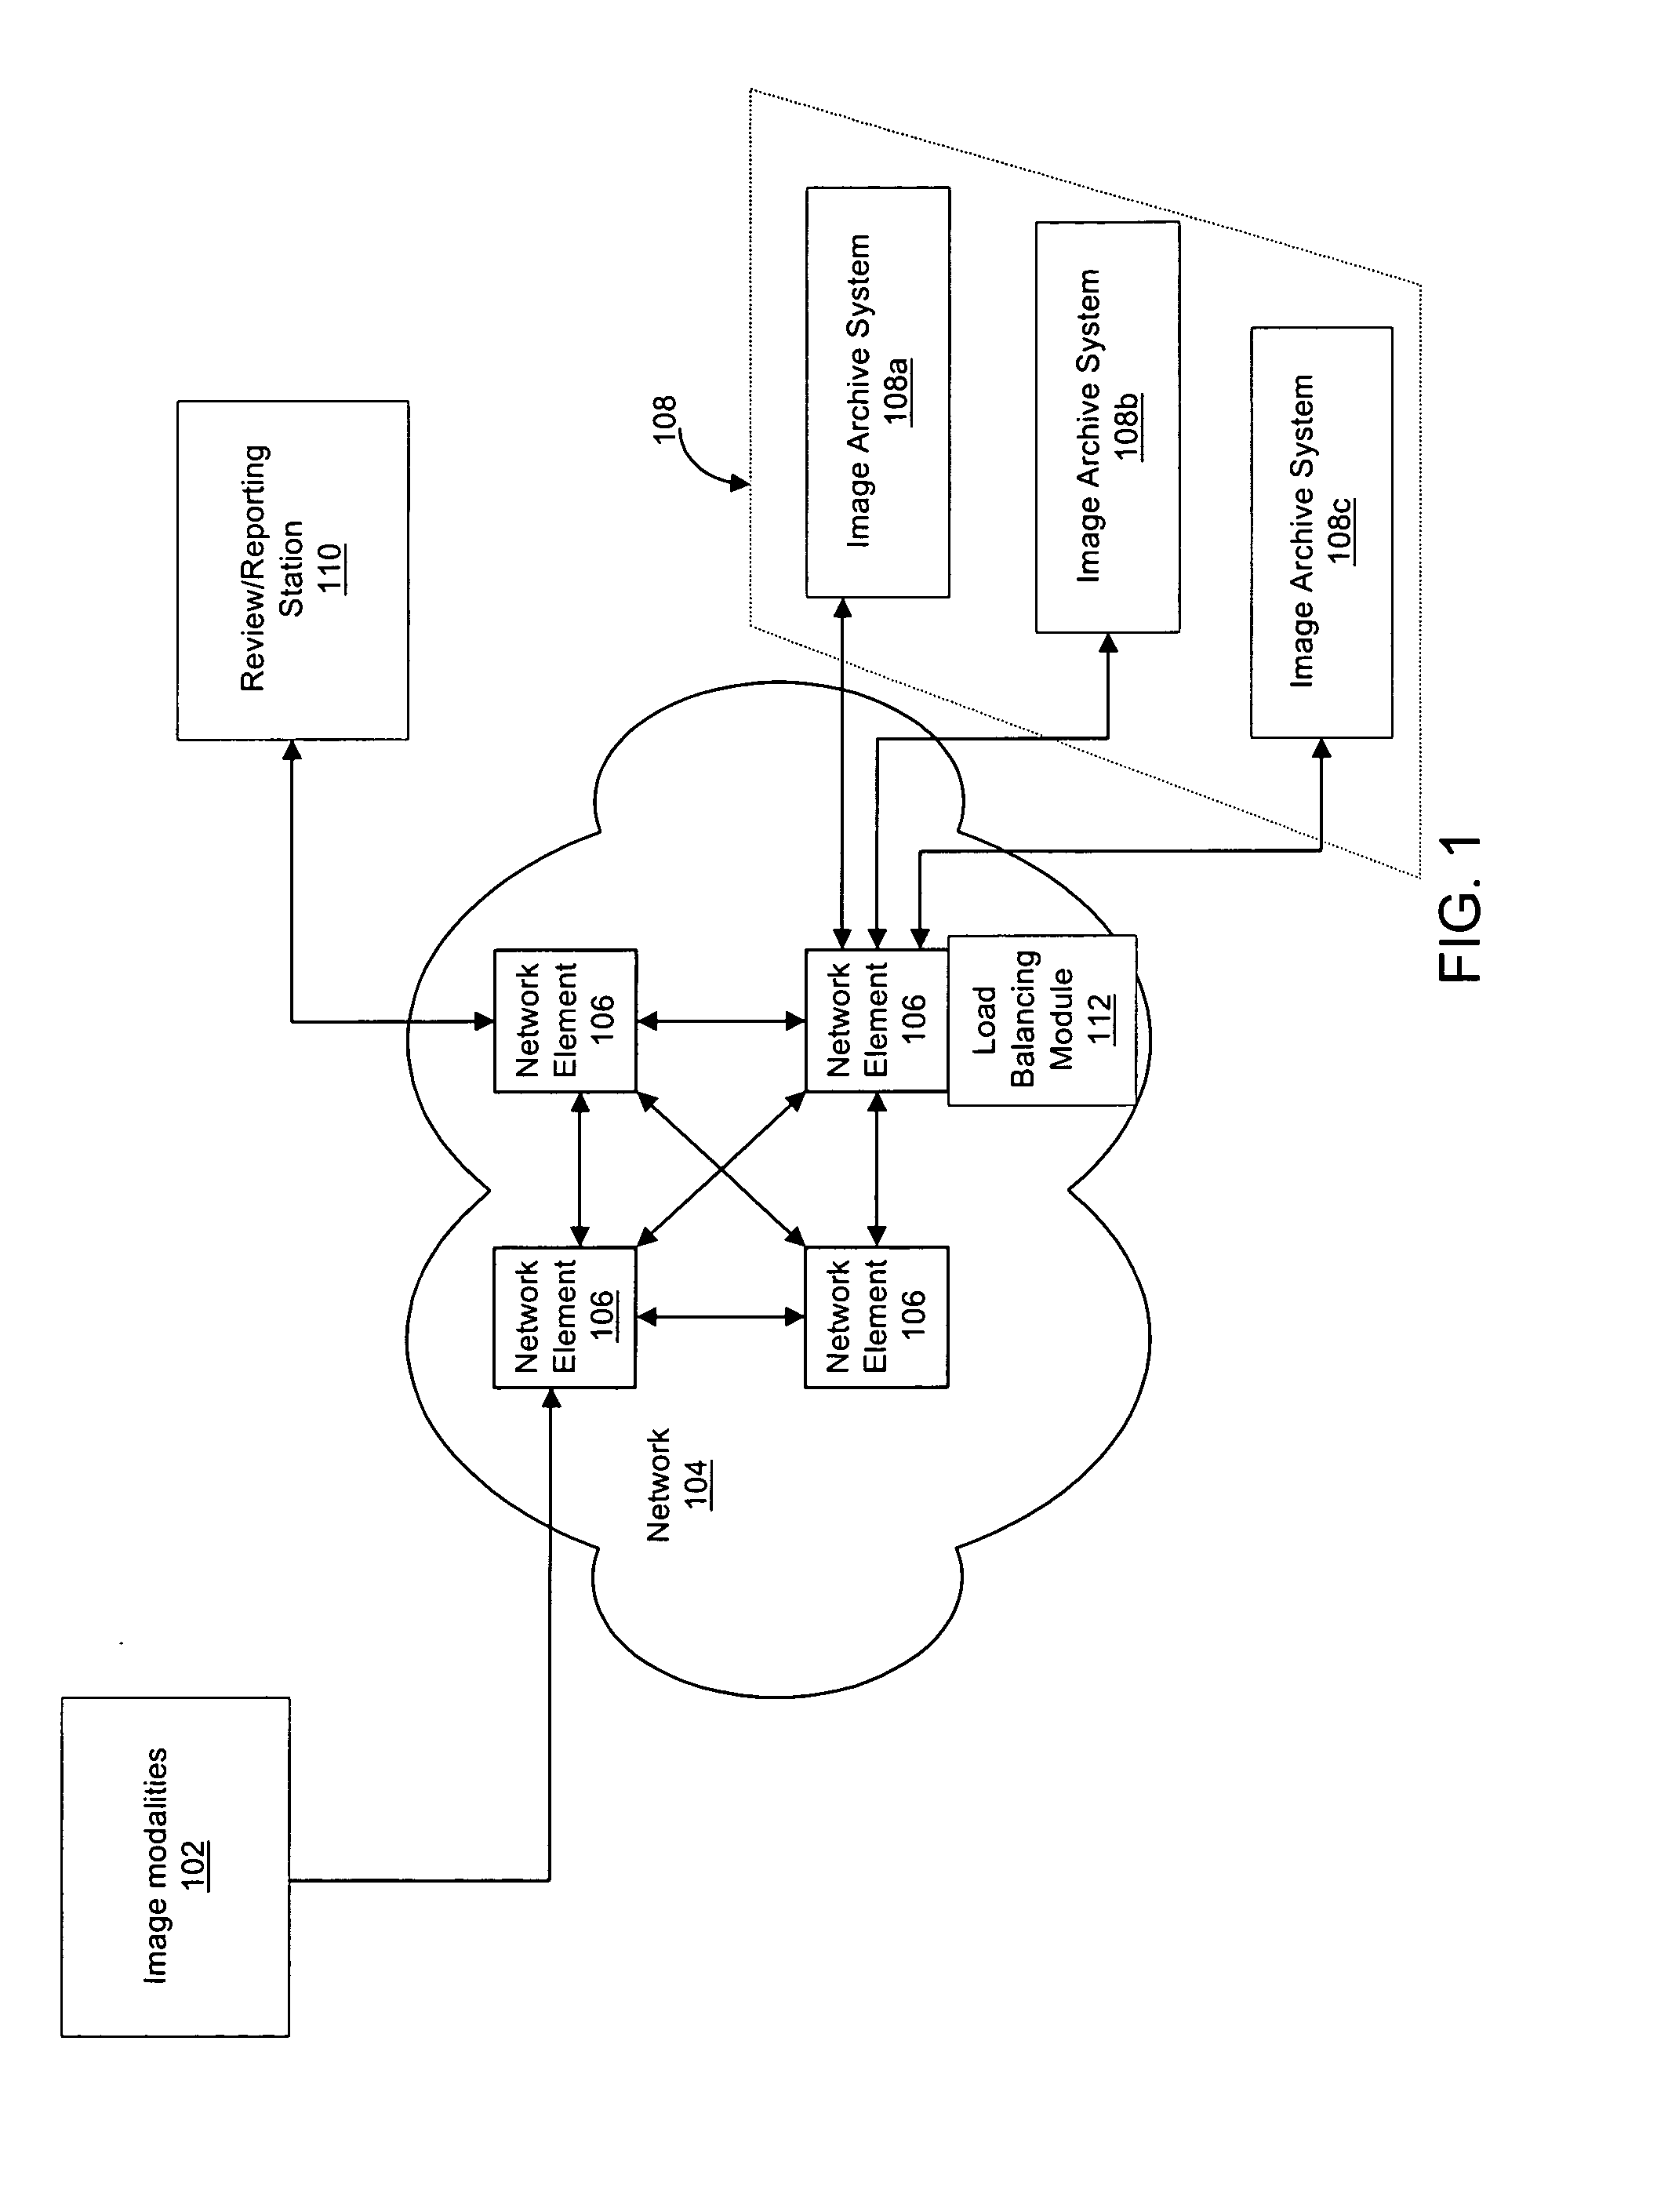 Method and apparatus for providing network based load balancing of medical image data